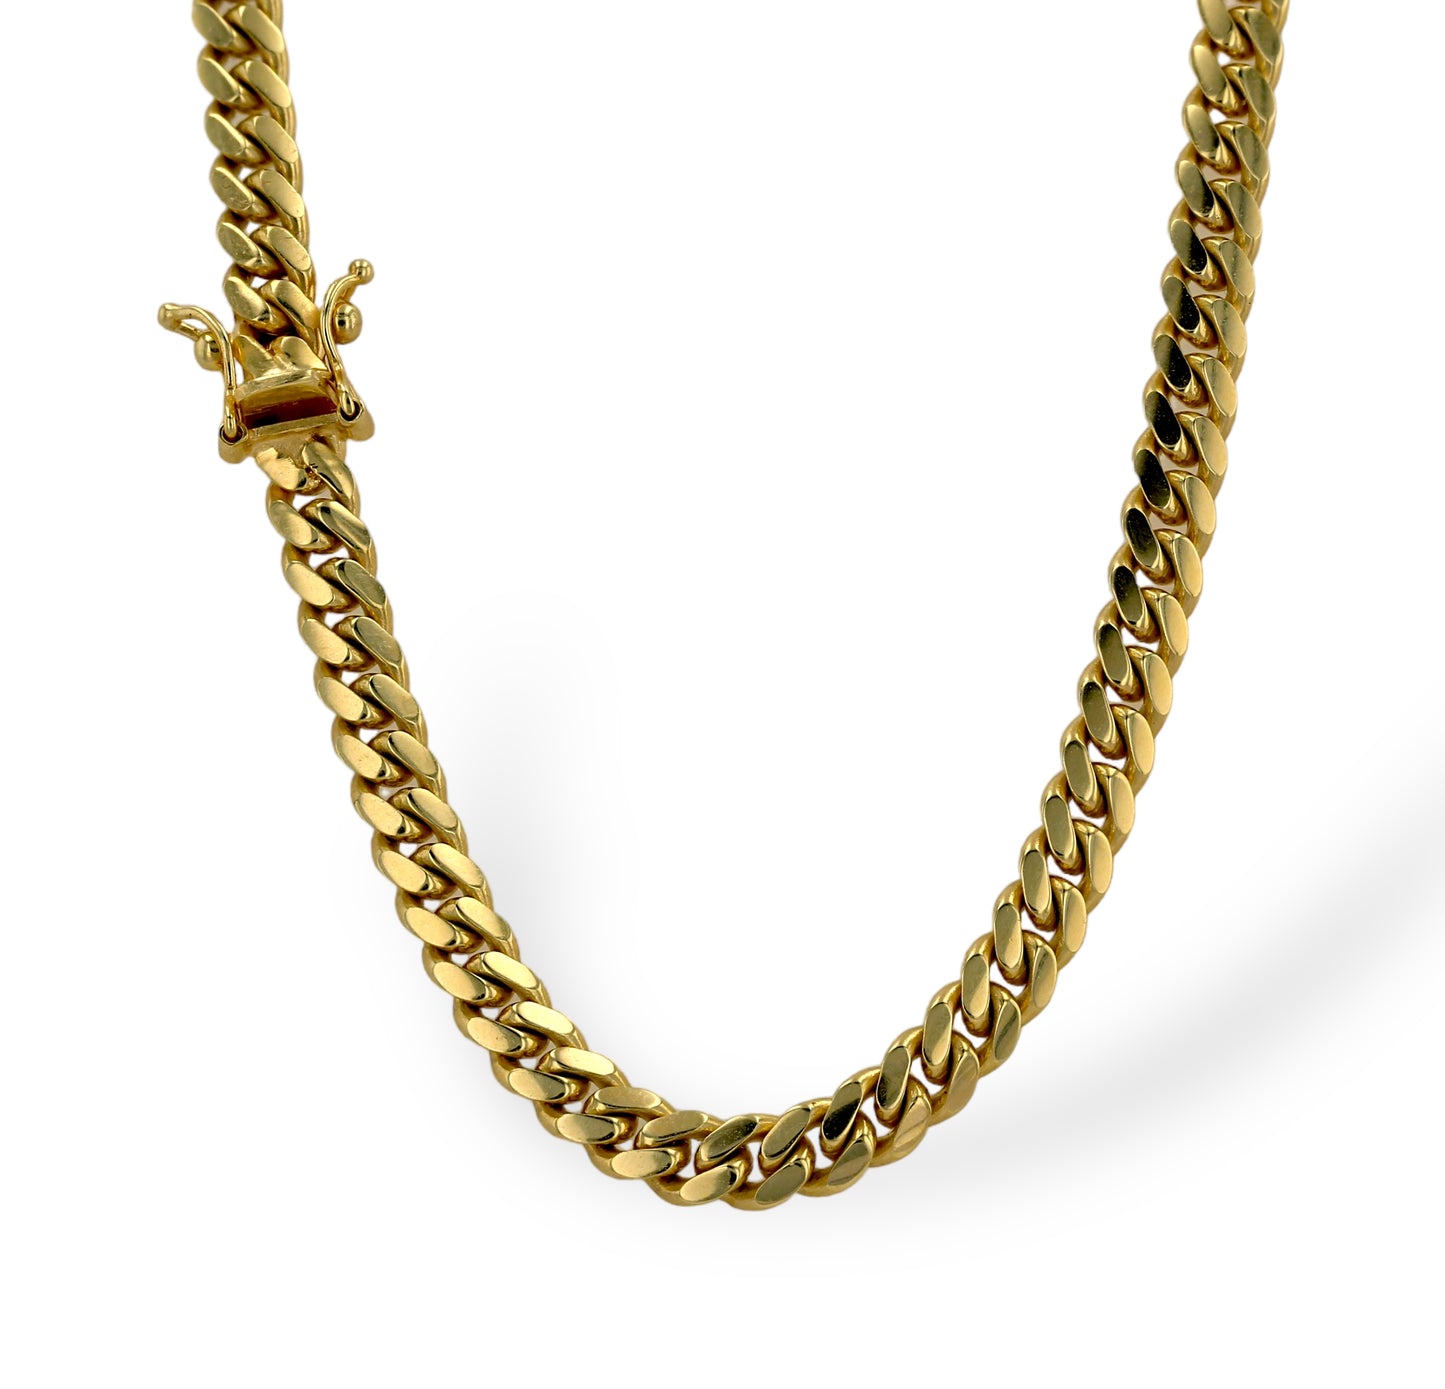 Solid 14k miami cuban link chain